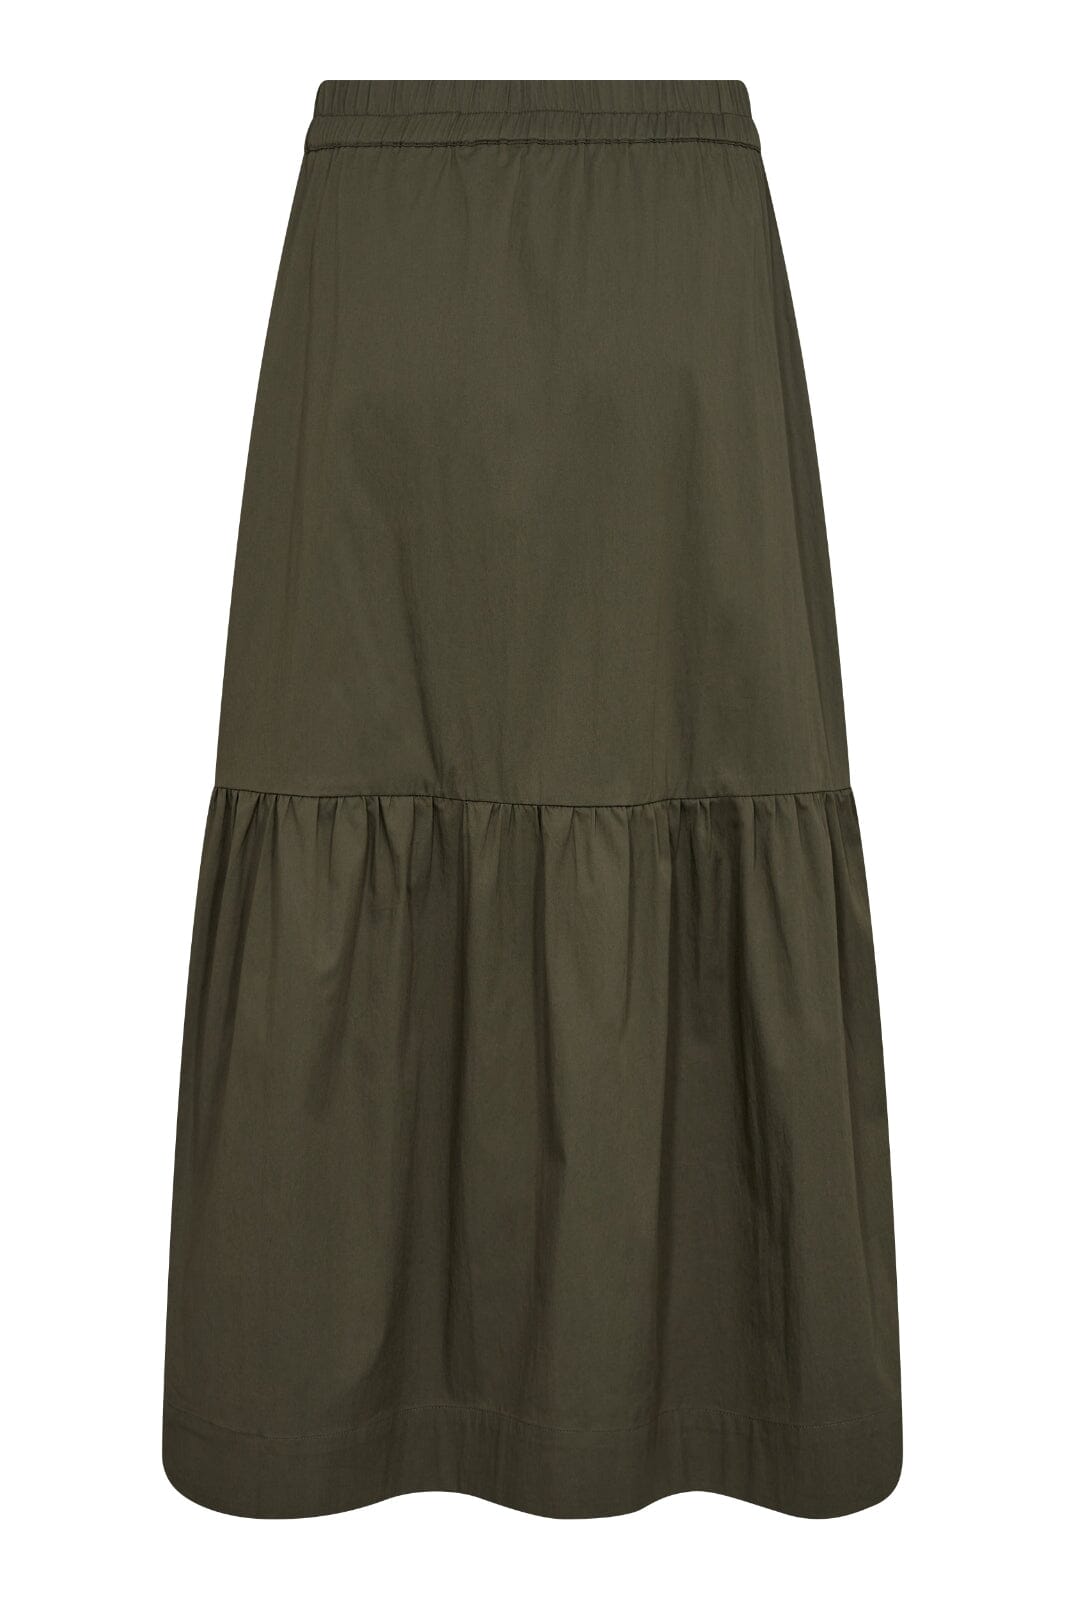 Forudbestilling - Co´couture - Cottoncc Crisp Gypsy Skirt 34112 - 7555 Army Nederdele 